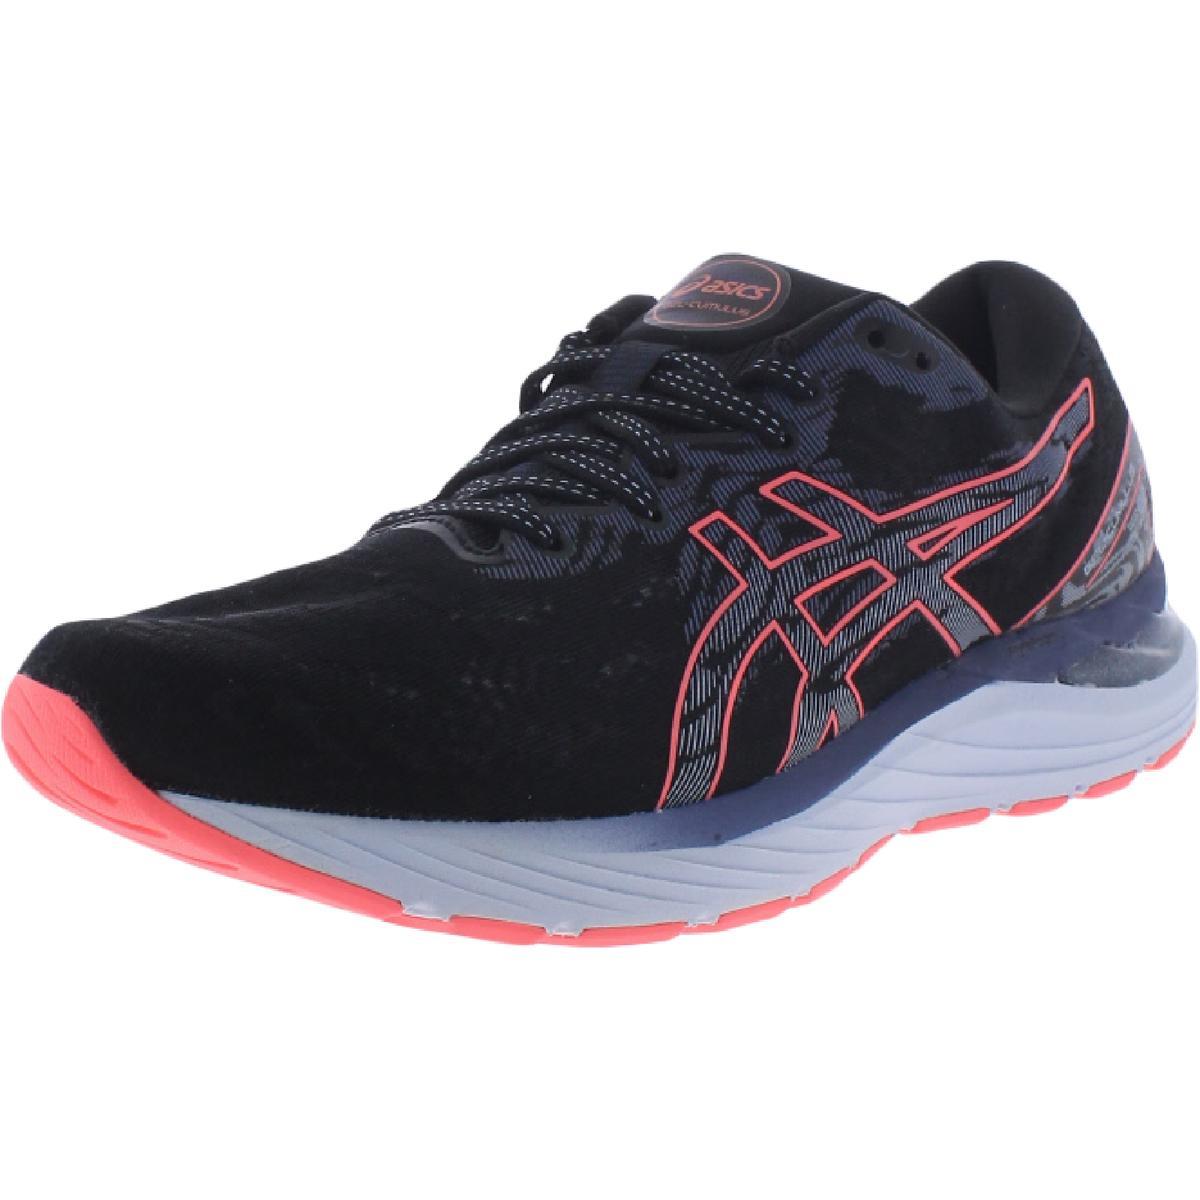 Asics Womens Gel-cumulus 23 Fitness Lifestyle Running Shoes Sneakers Bhfo 5008 Black/Blazing Coral